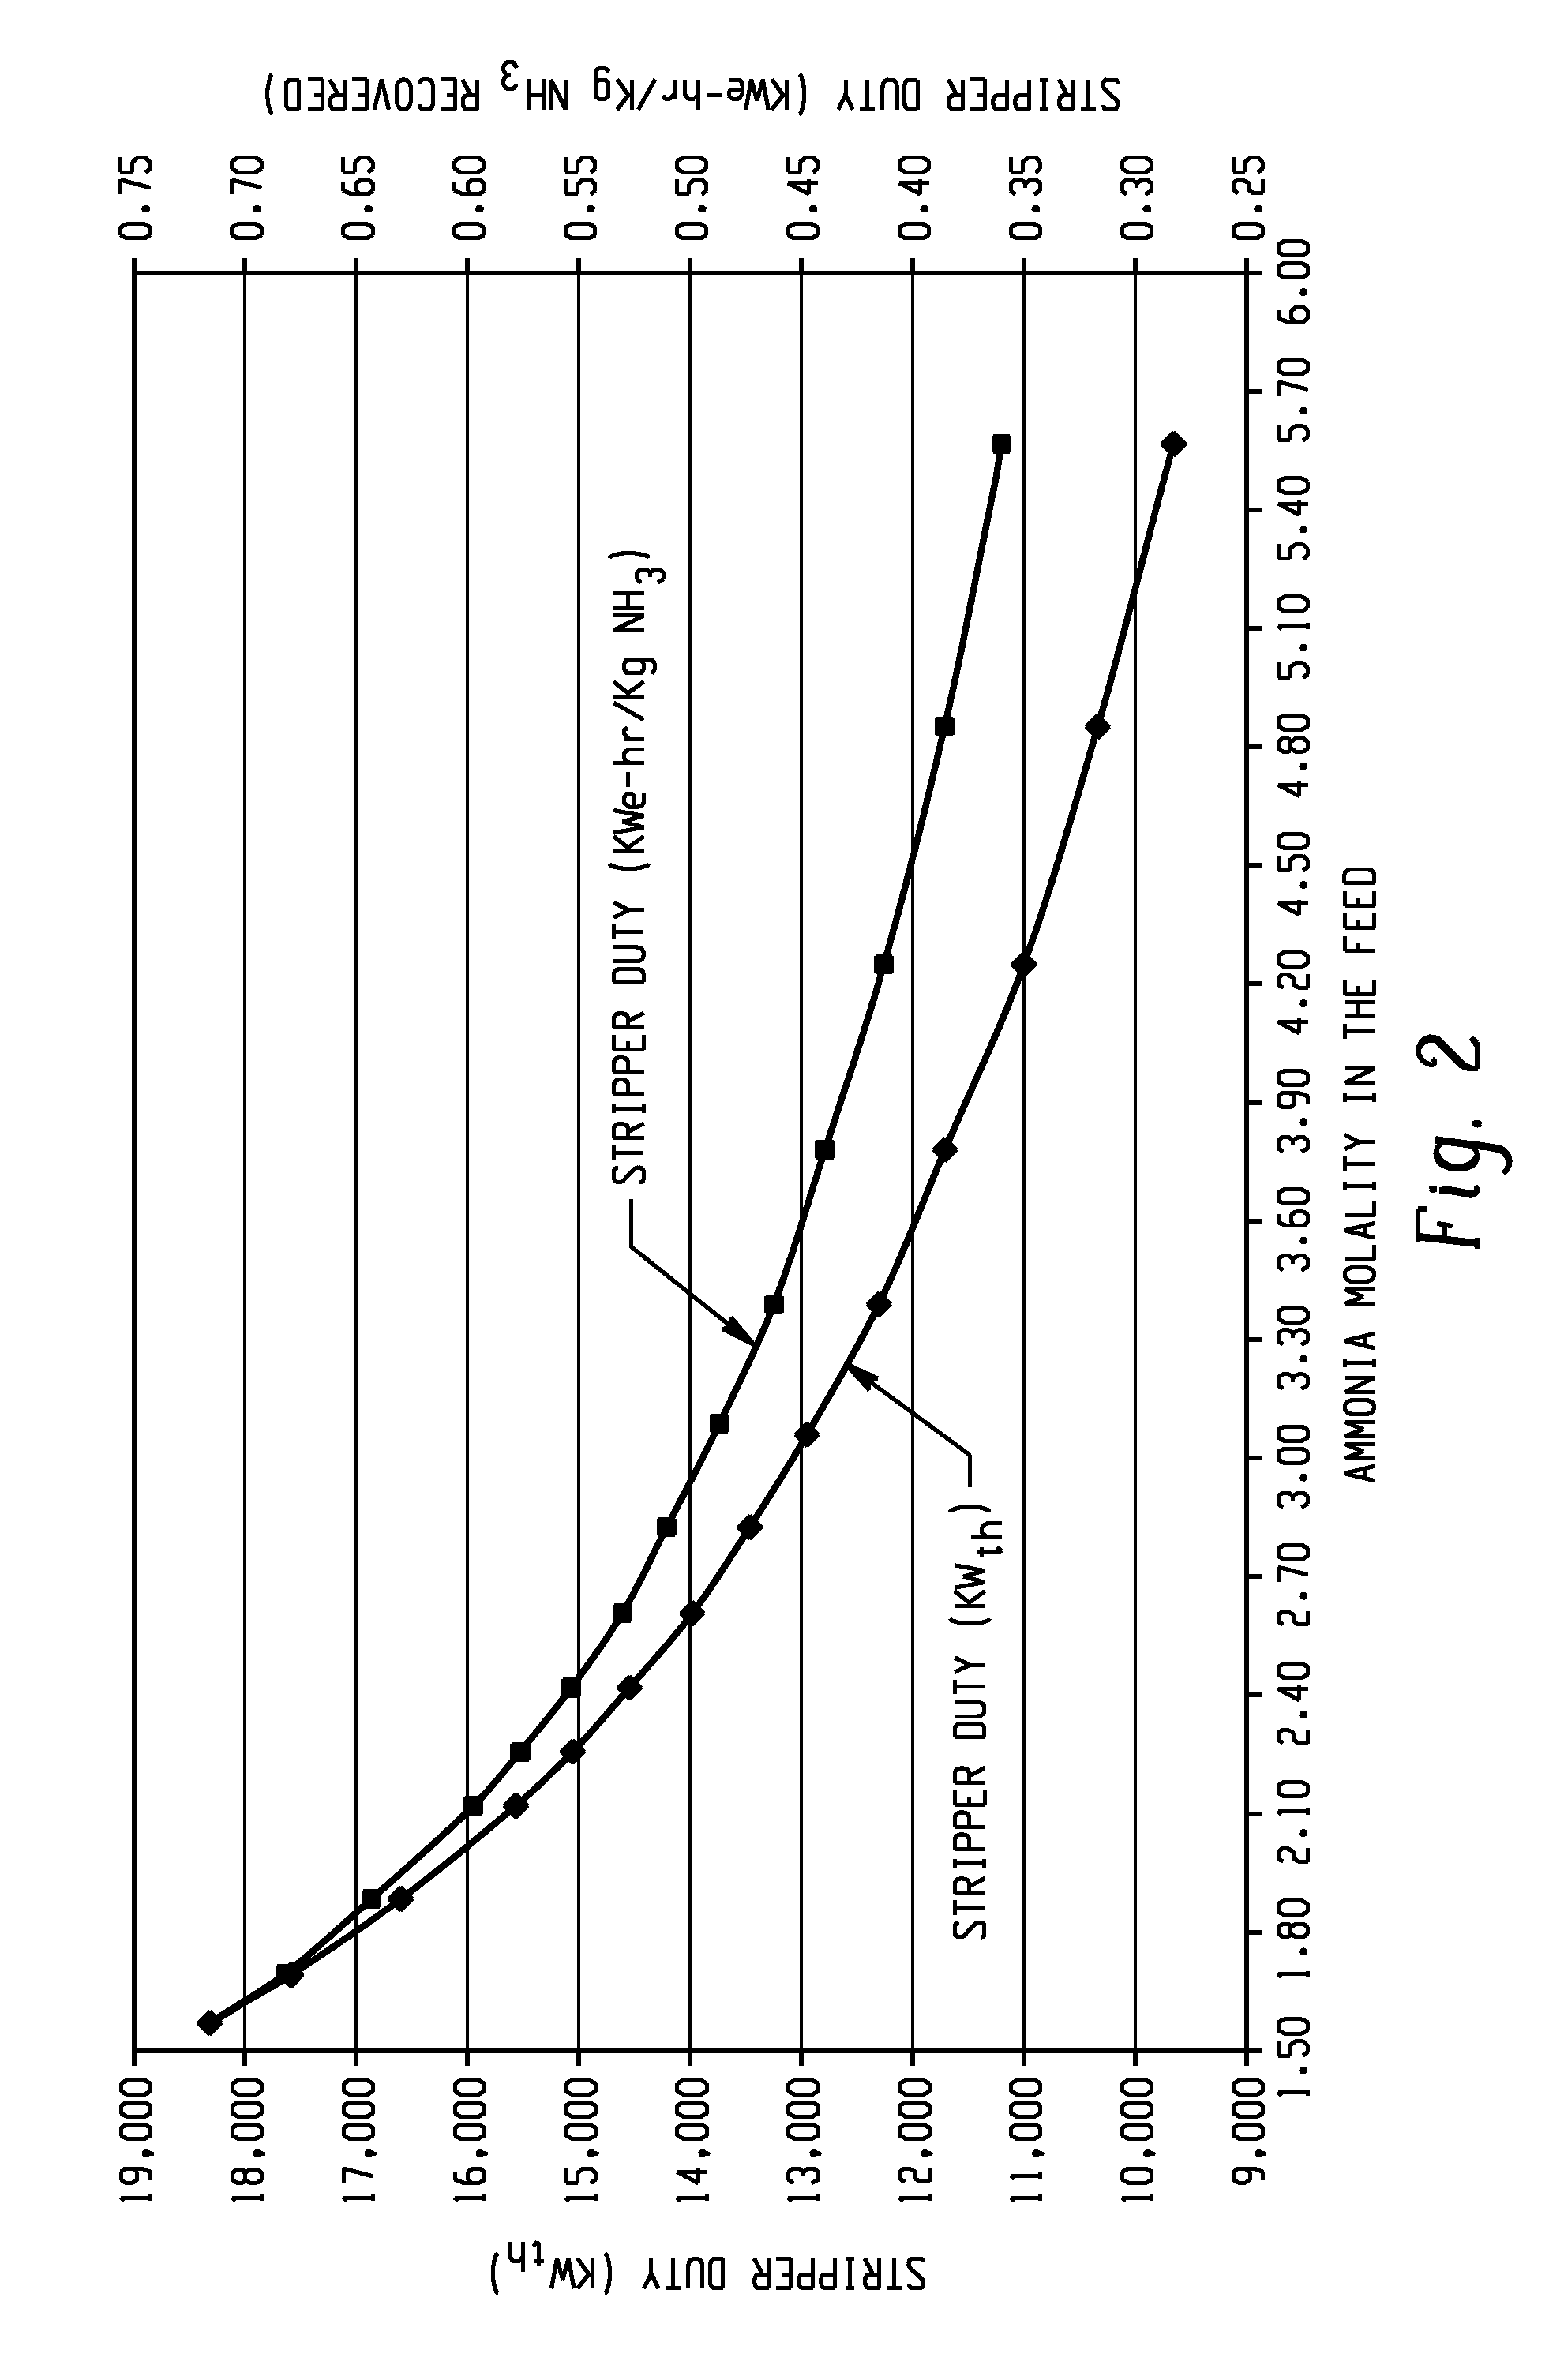 Chilled ammonia based co2 capture system with wash system and processes of use